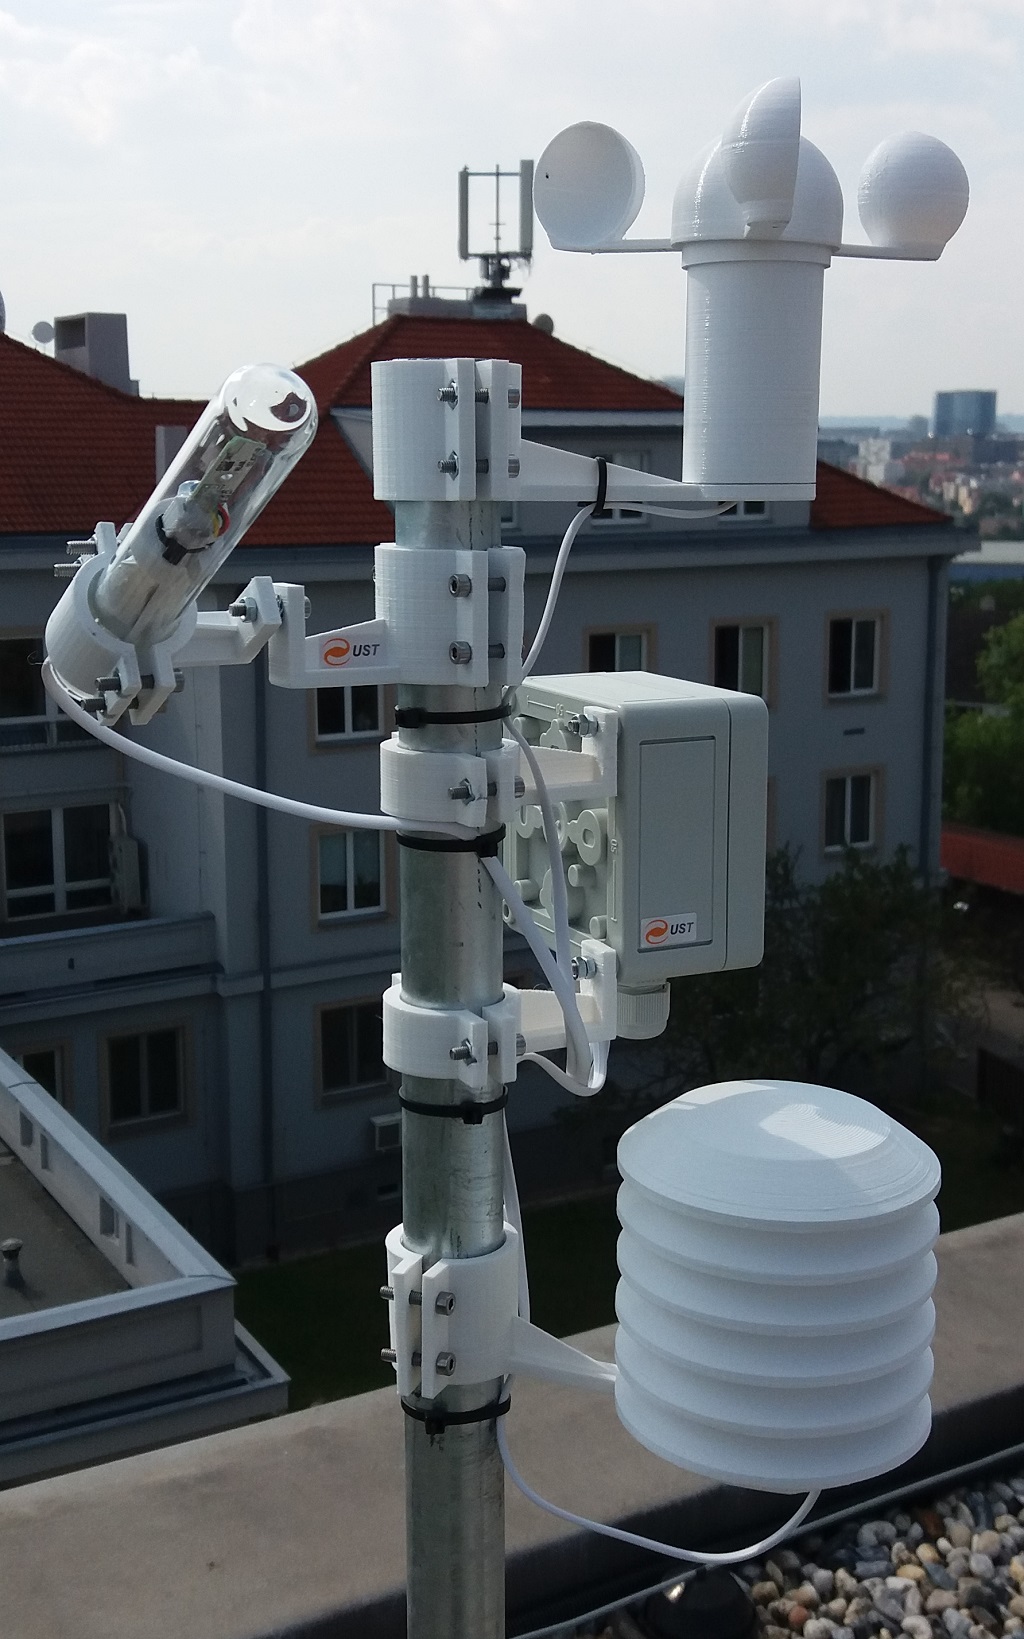 Automatic Weather station mounted on building roof